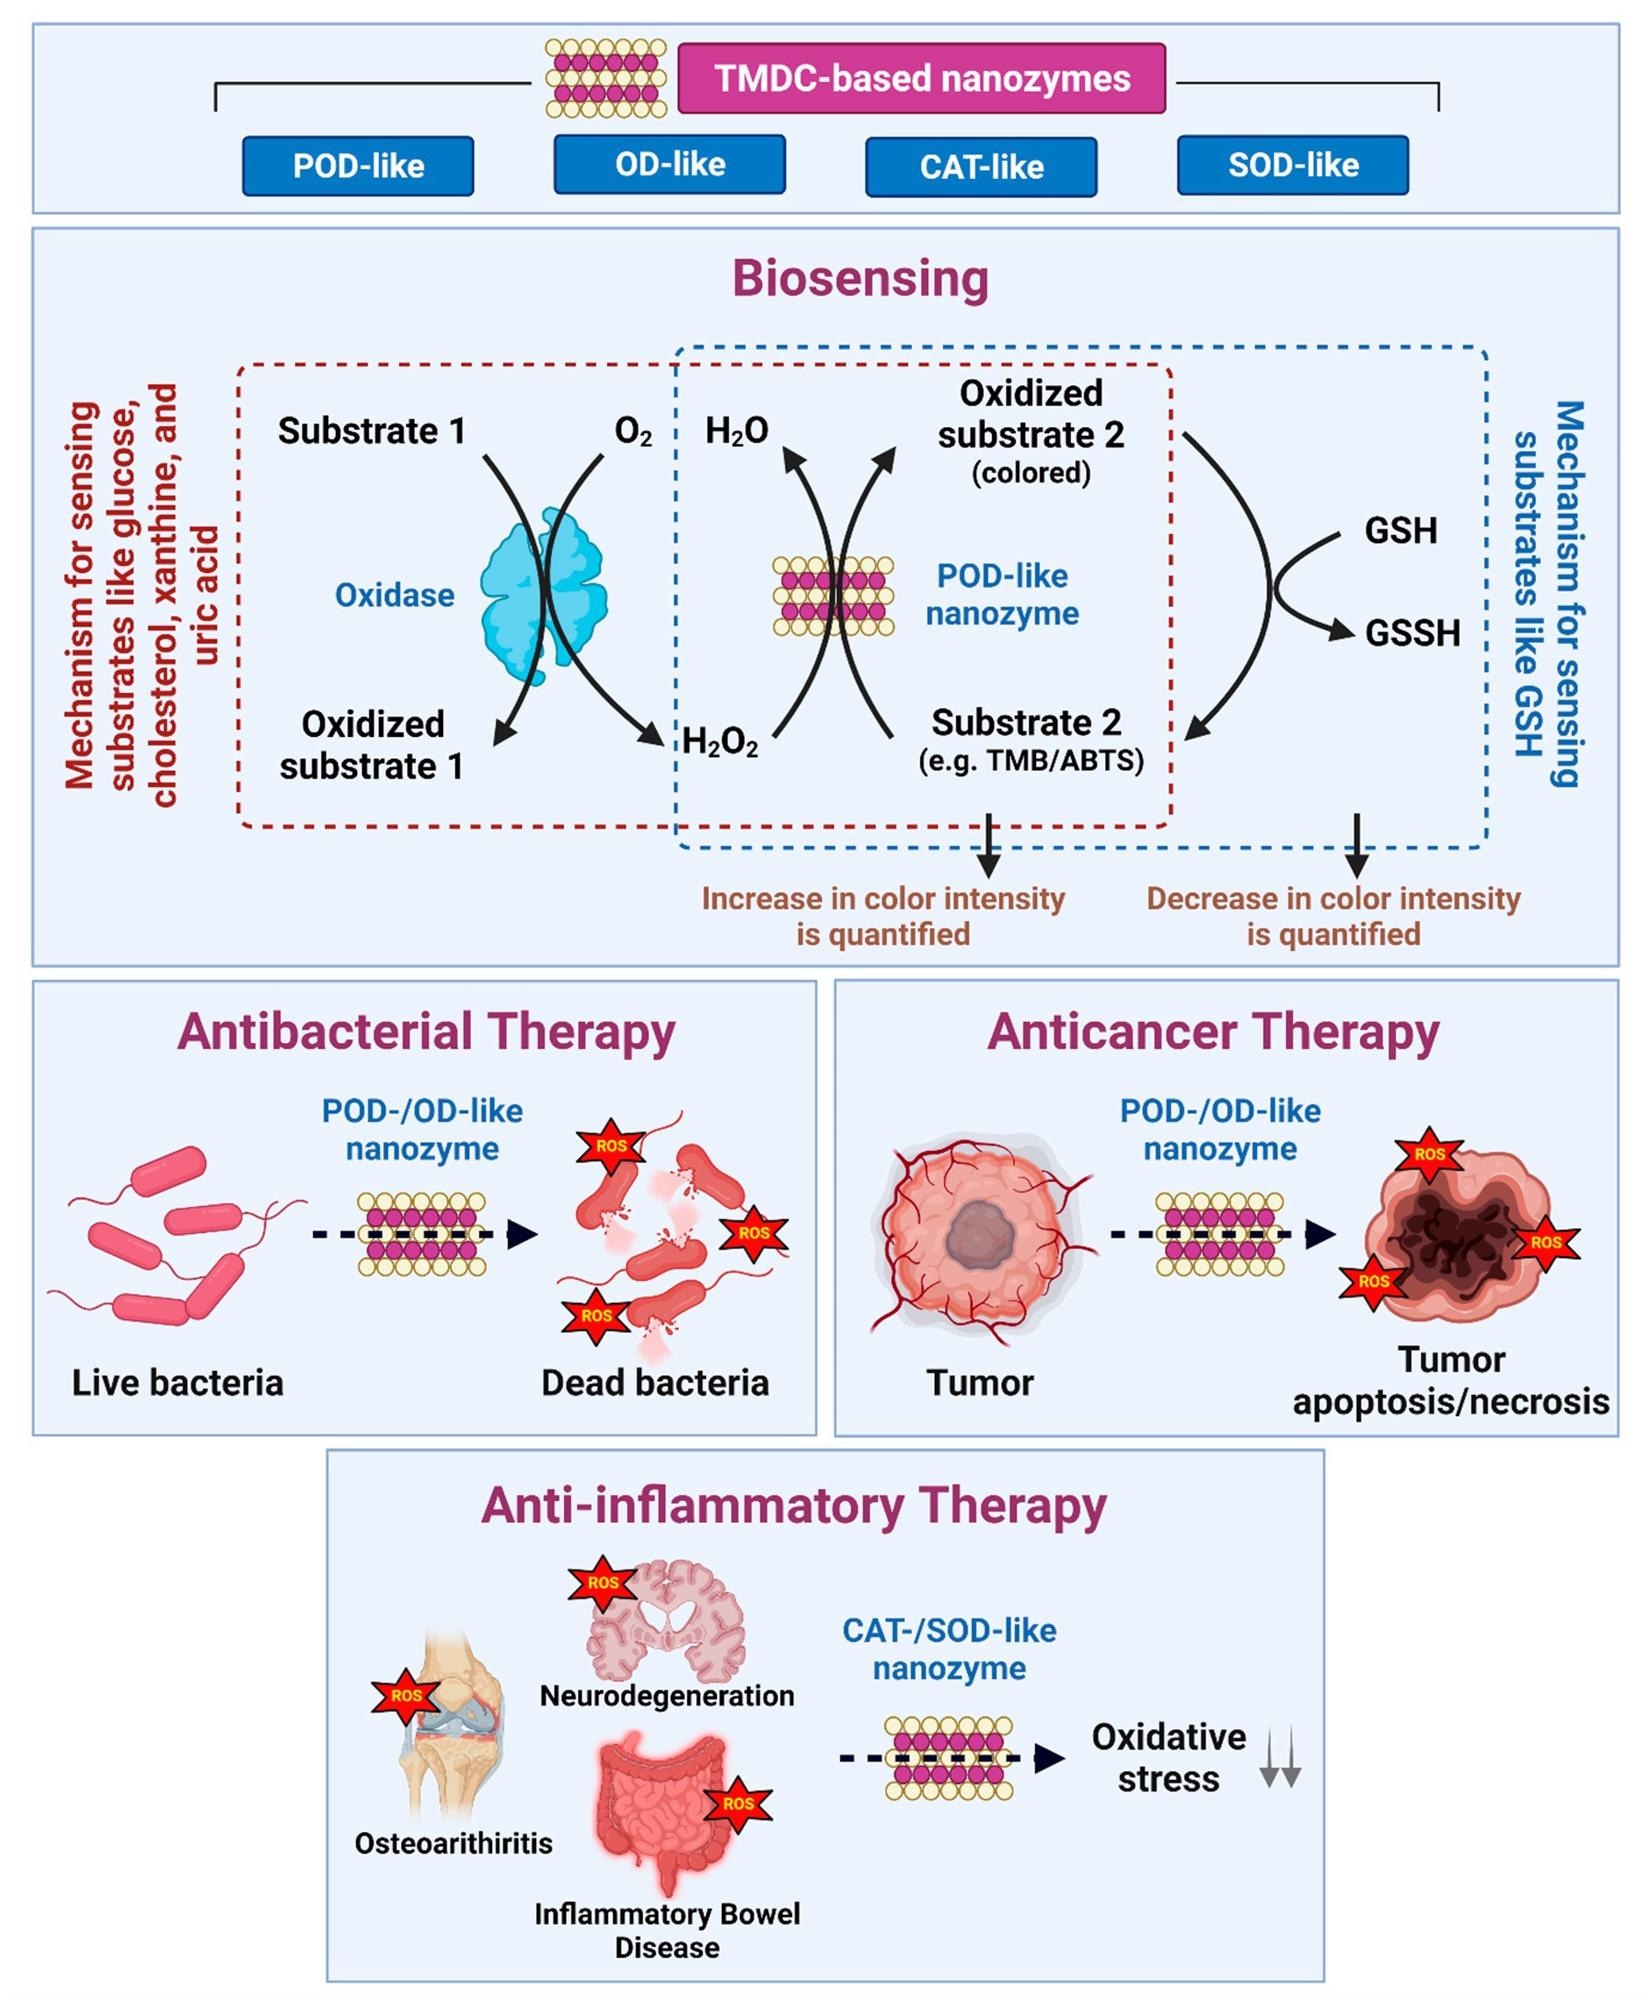 Summary of TMDC-based NZs, their nanozymatic activities, and biomedical applications—biosensing, antibacterial, anticancer, and anti-inflammatory therapy.